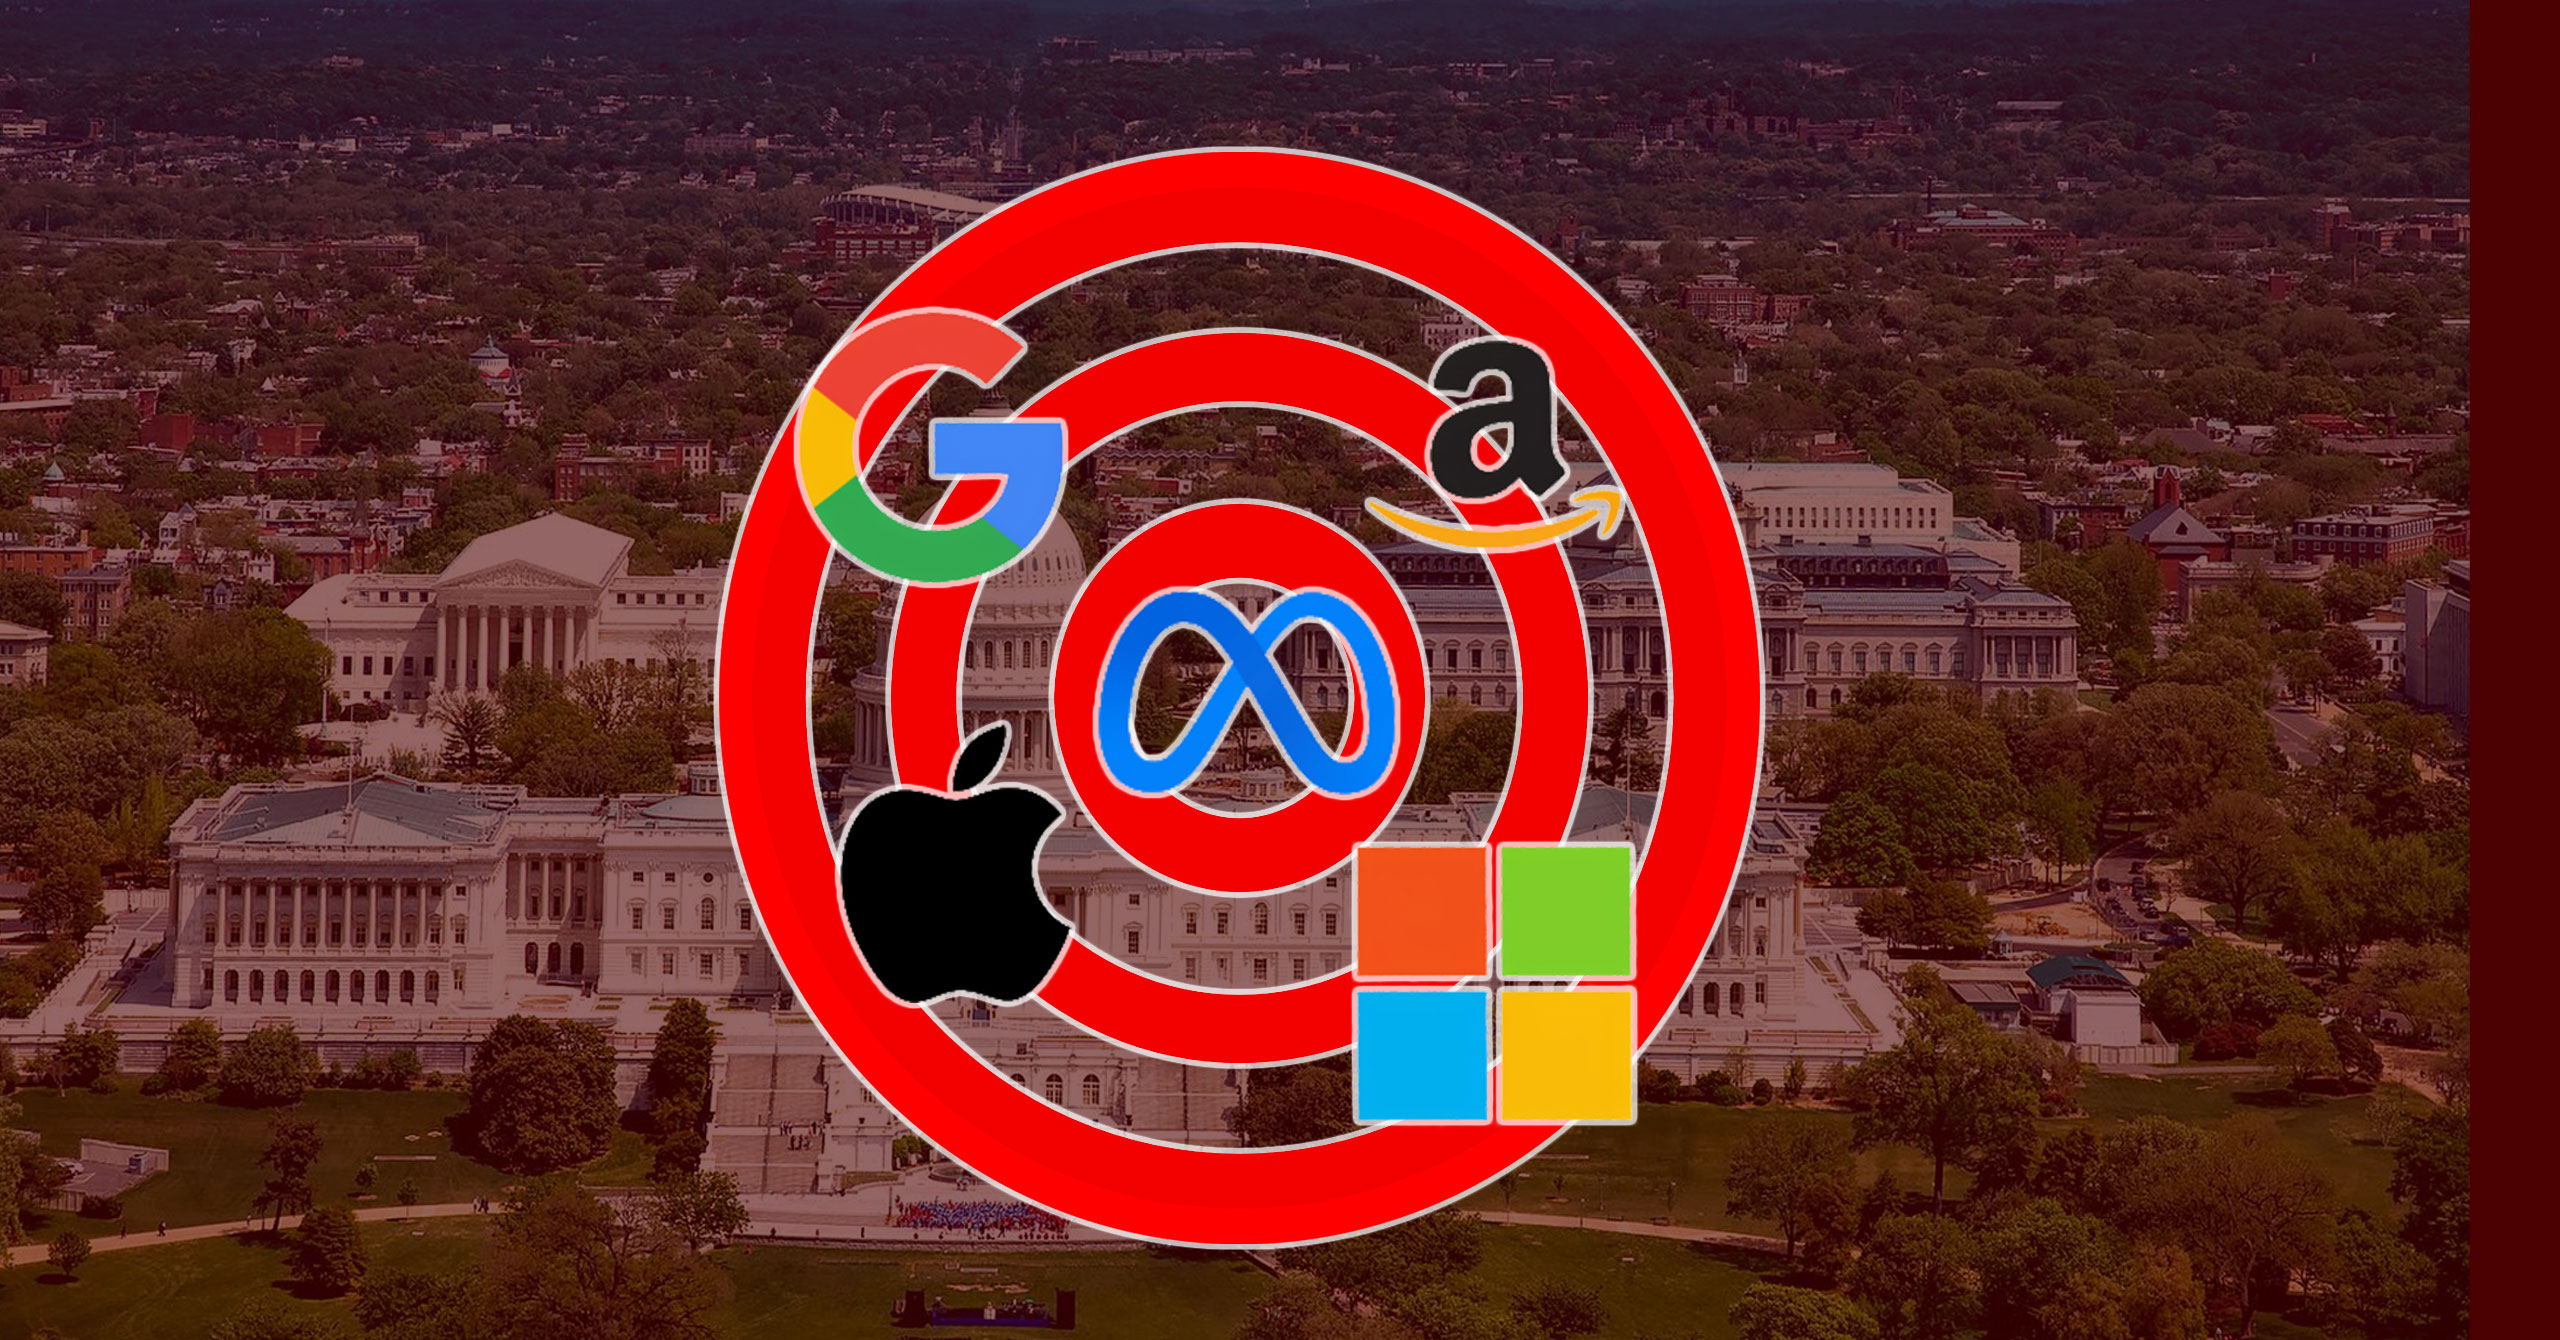 Logos for Google, Amazon, Apple and Microsoft on top of a taret with Washington D.C. in the background